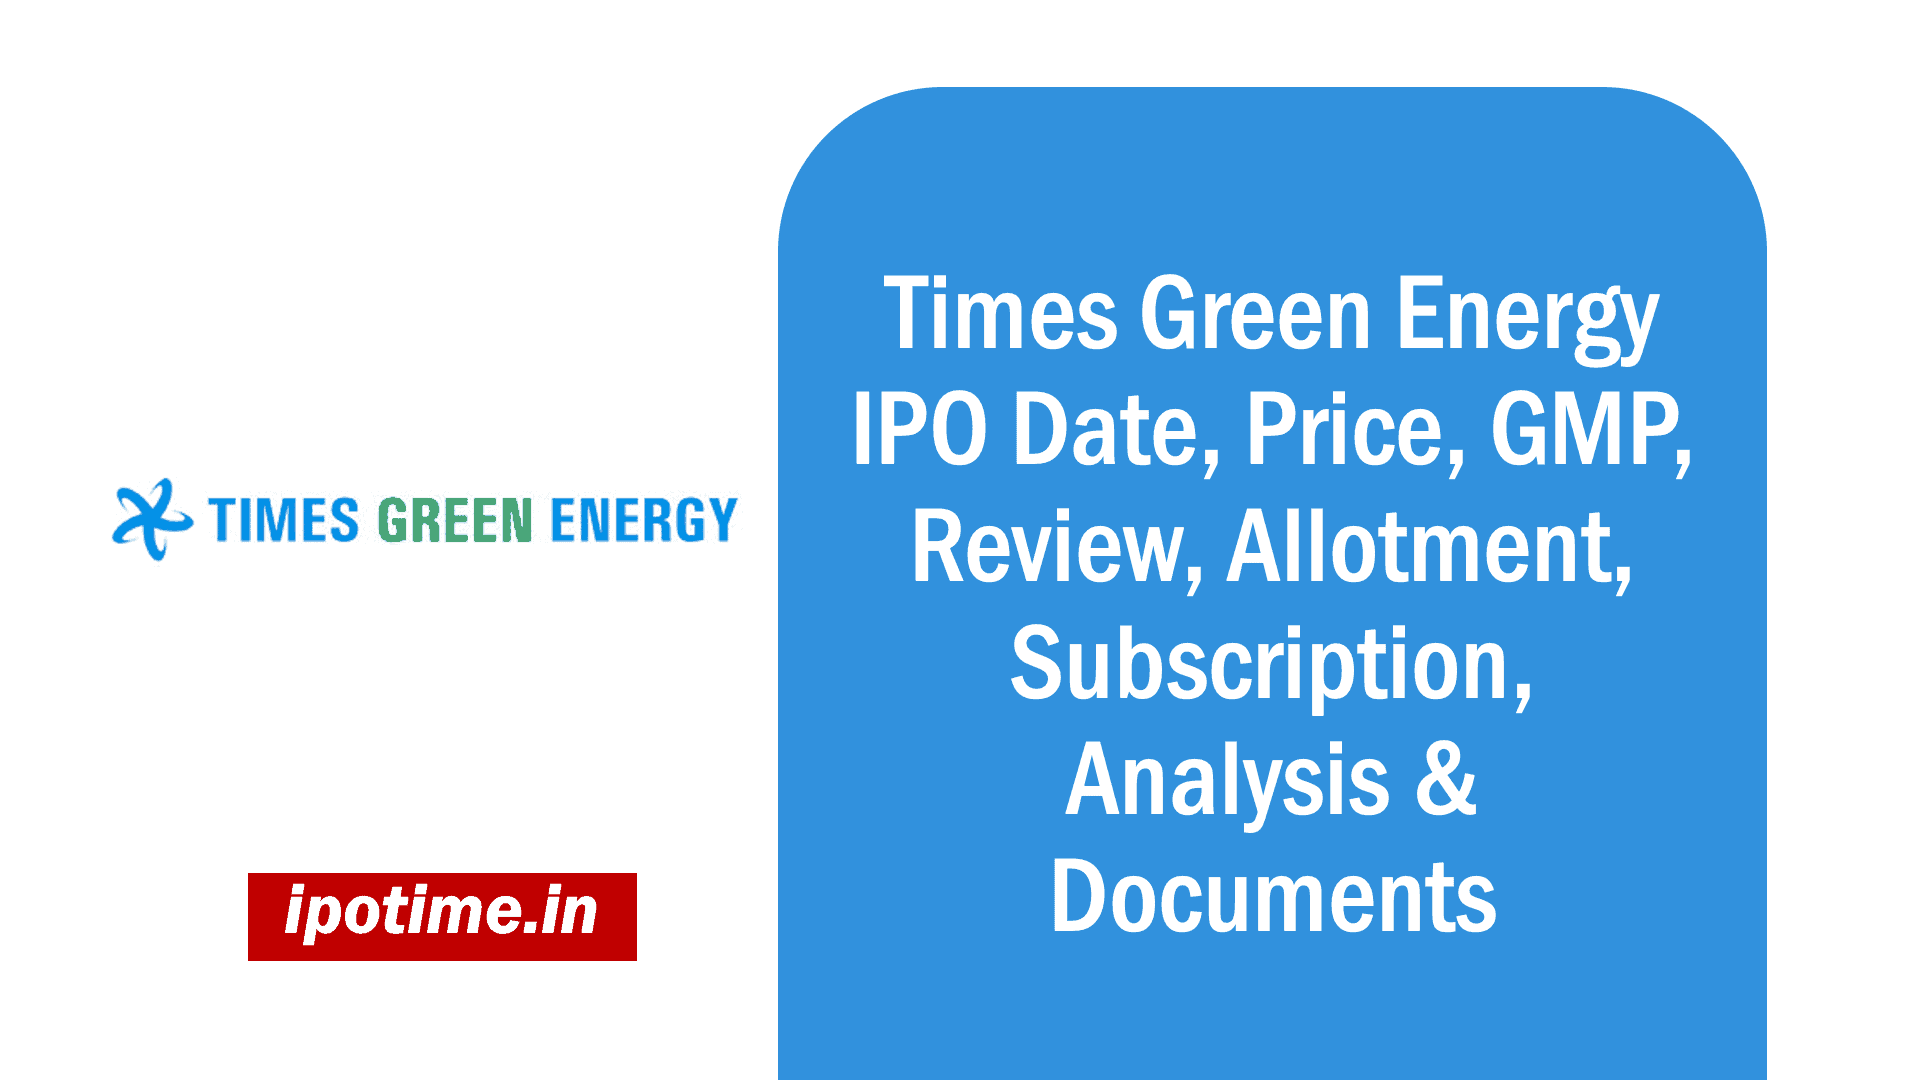 Times Green Energy IPO